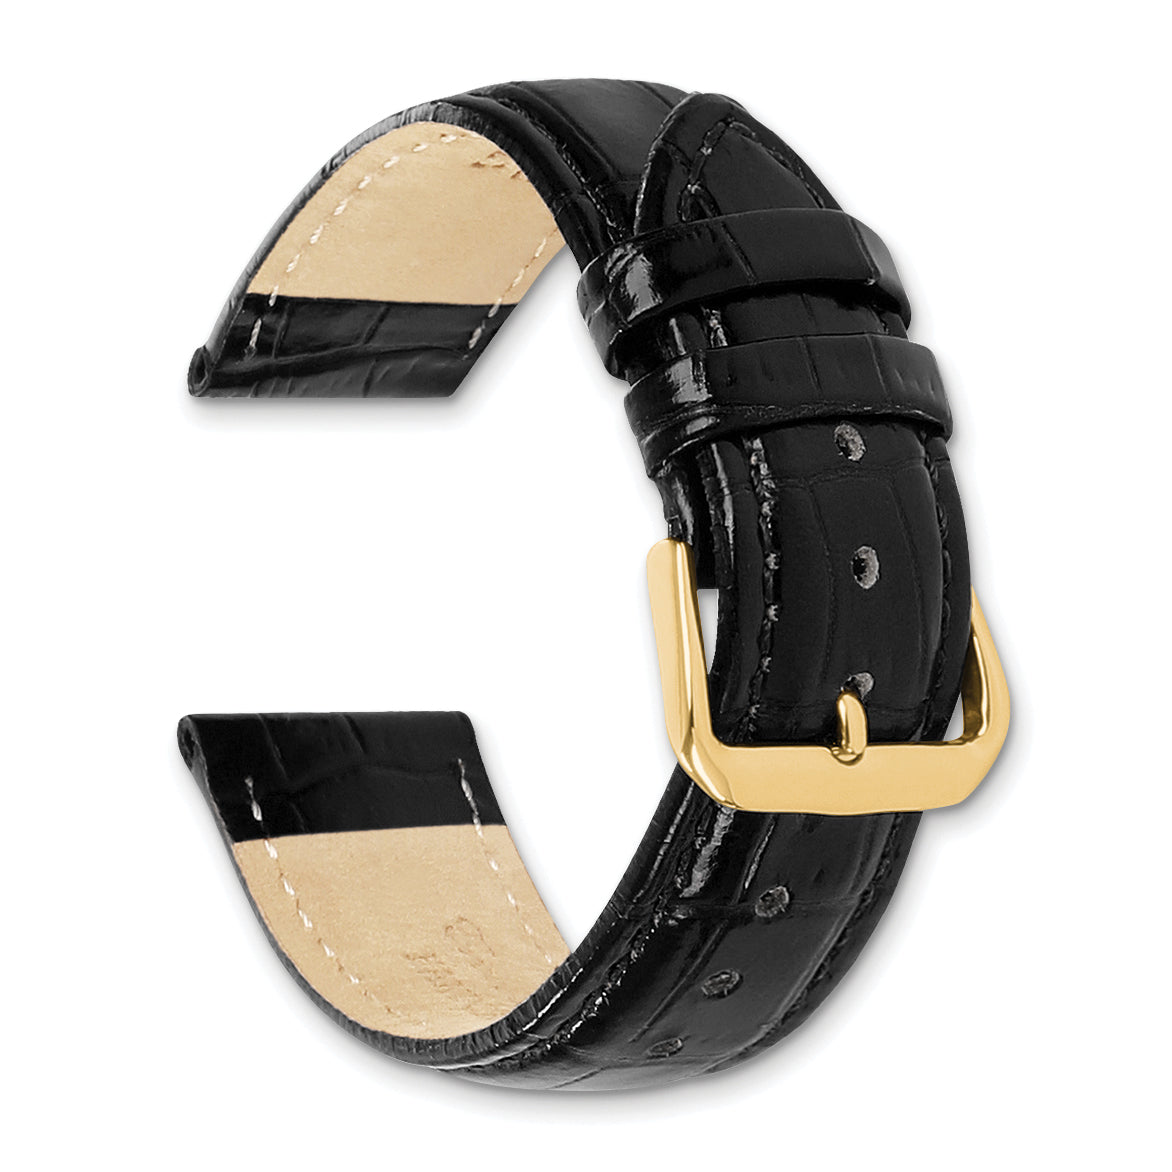 10mm Black Crocodile Grain Leather with Dark Stitching and Gold-tone Buckle 6.75 inch Watch Band